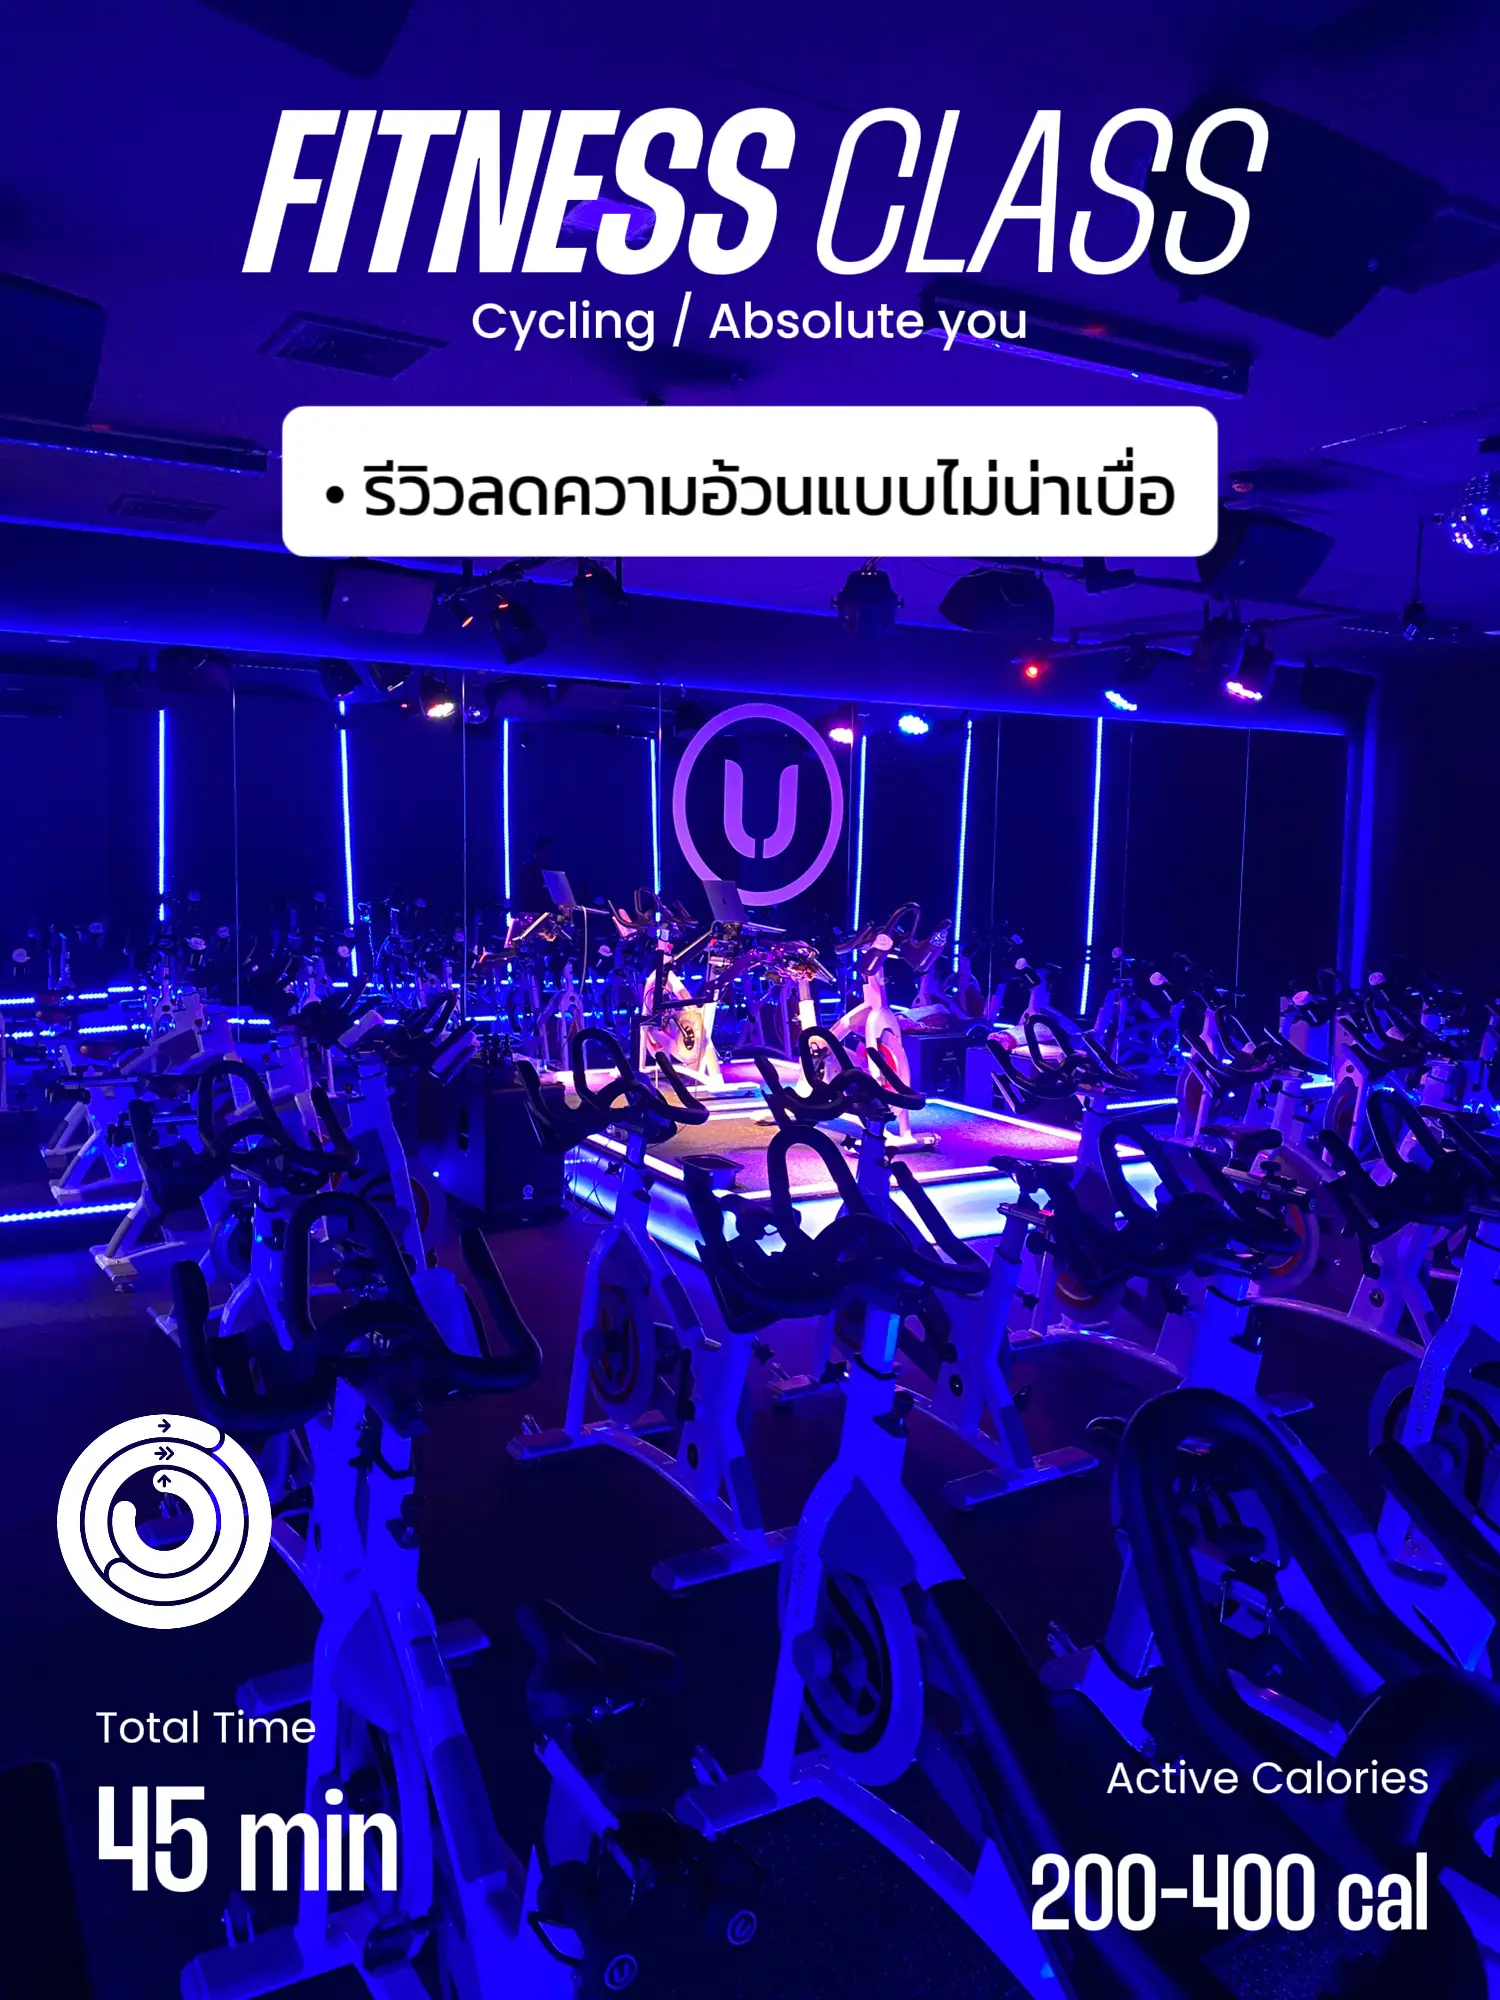 Absolute Boutique Fitness Studio (Thailand) - Market Place Nanglinchee:  Read Reviews and Book Classes on ClassPass